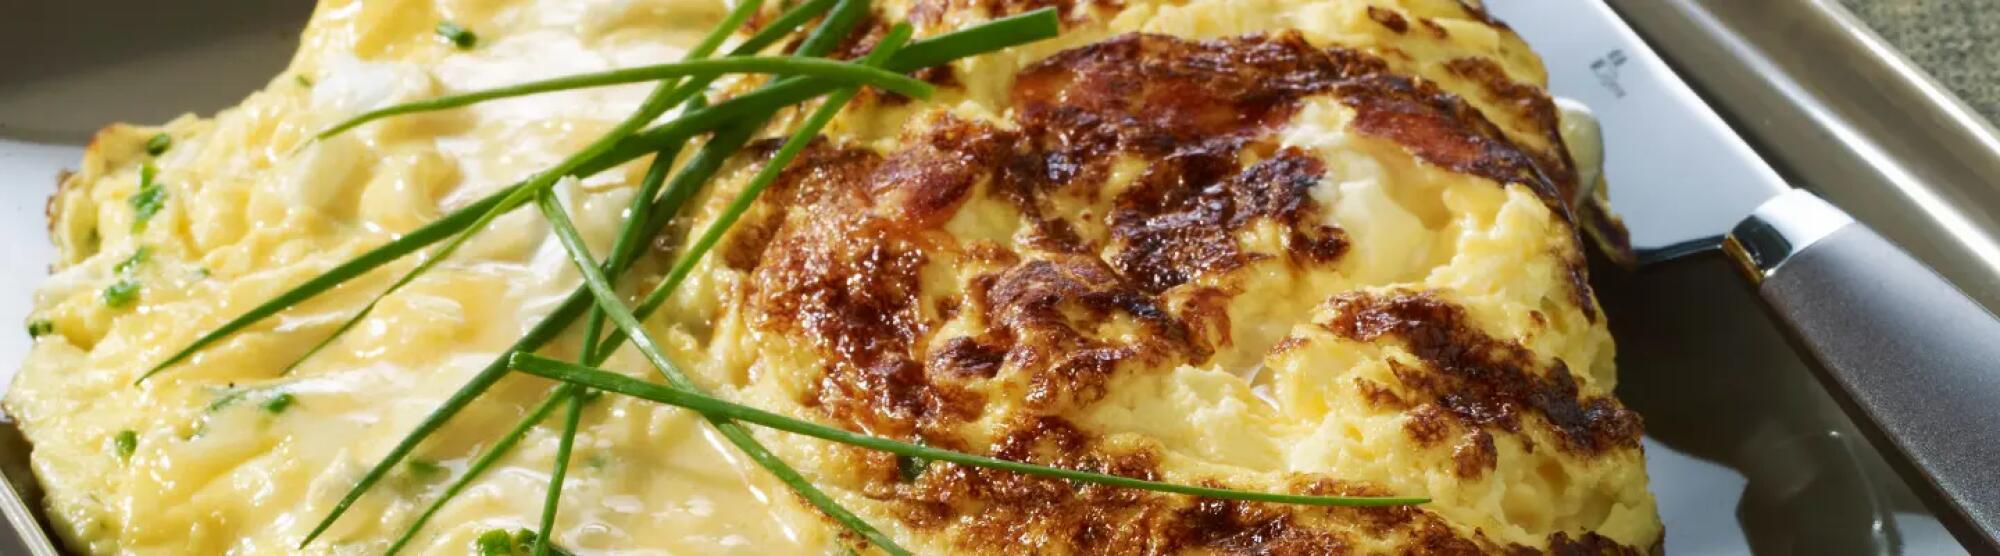 Recette : Omelette baveuse au fromage